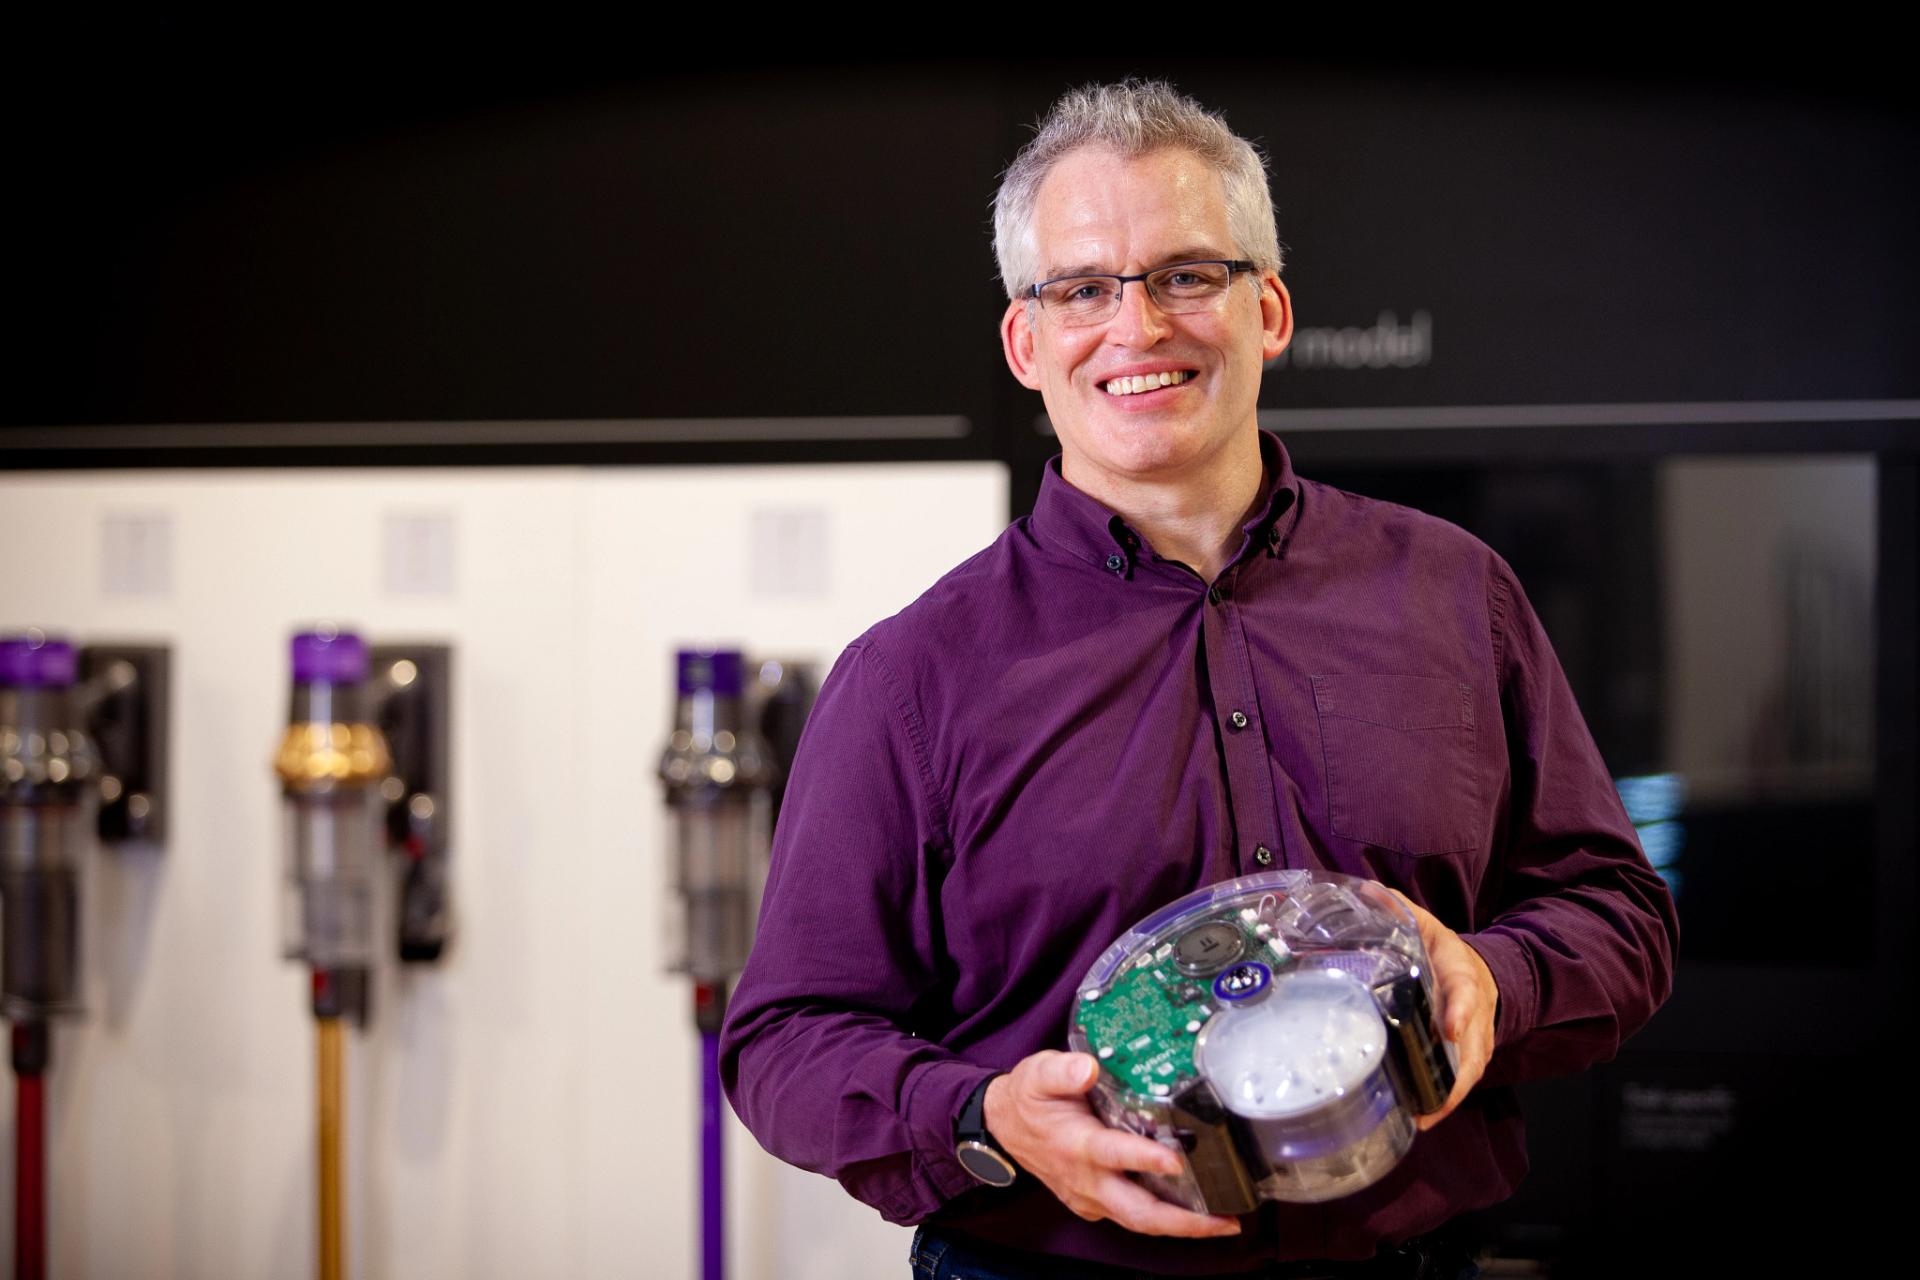 Mike Aldred with a robot vacuum prototype in front of Dyson vacuums.